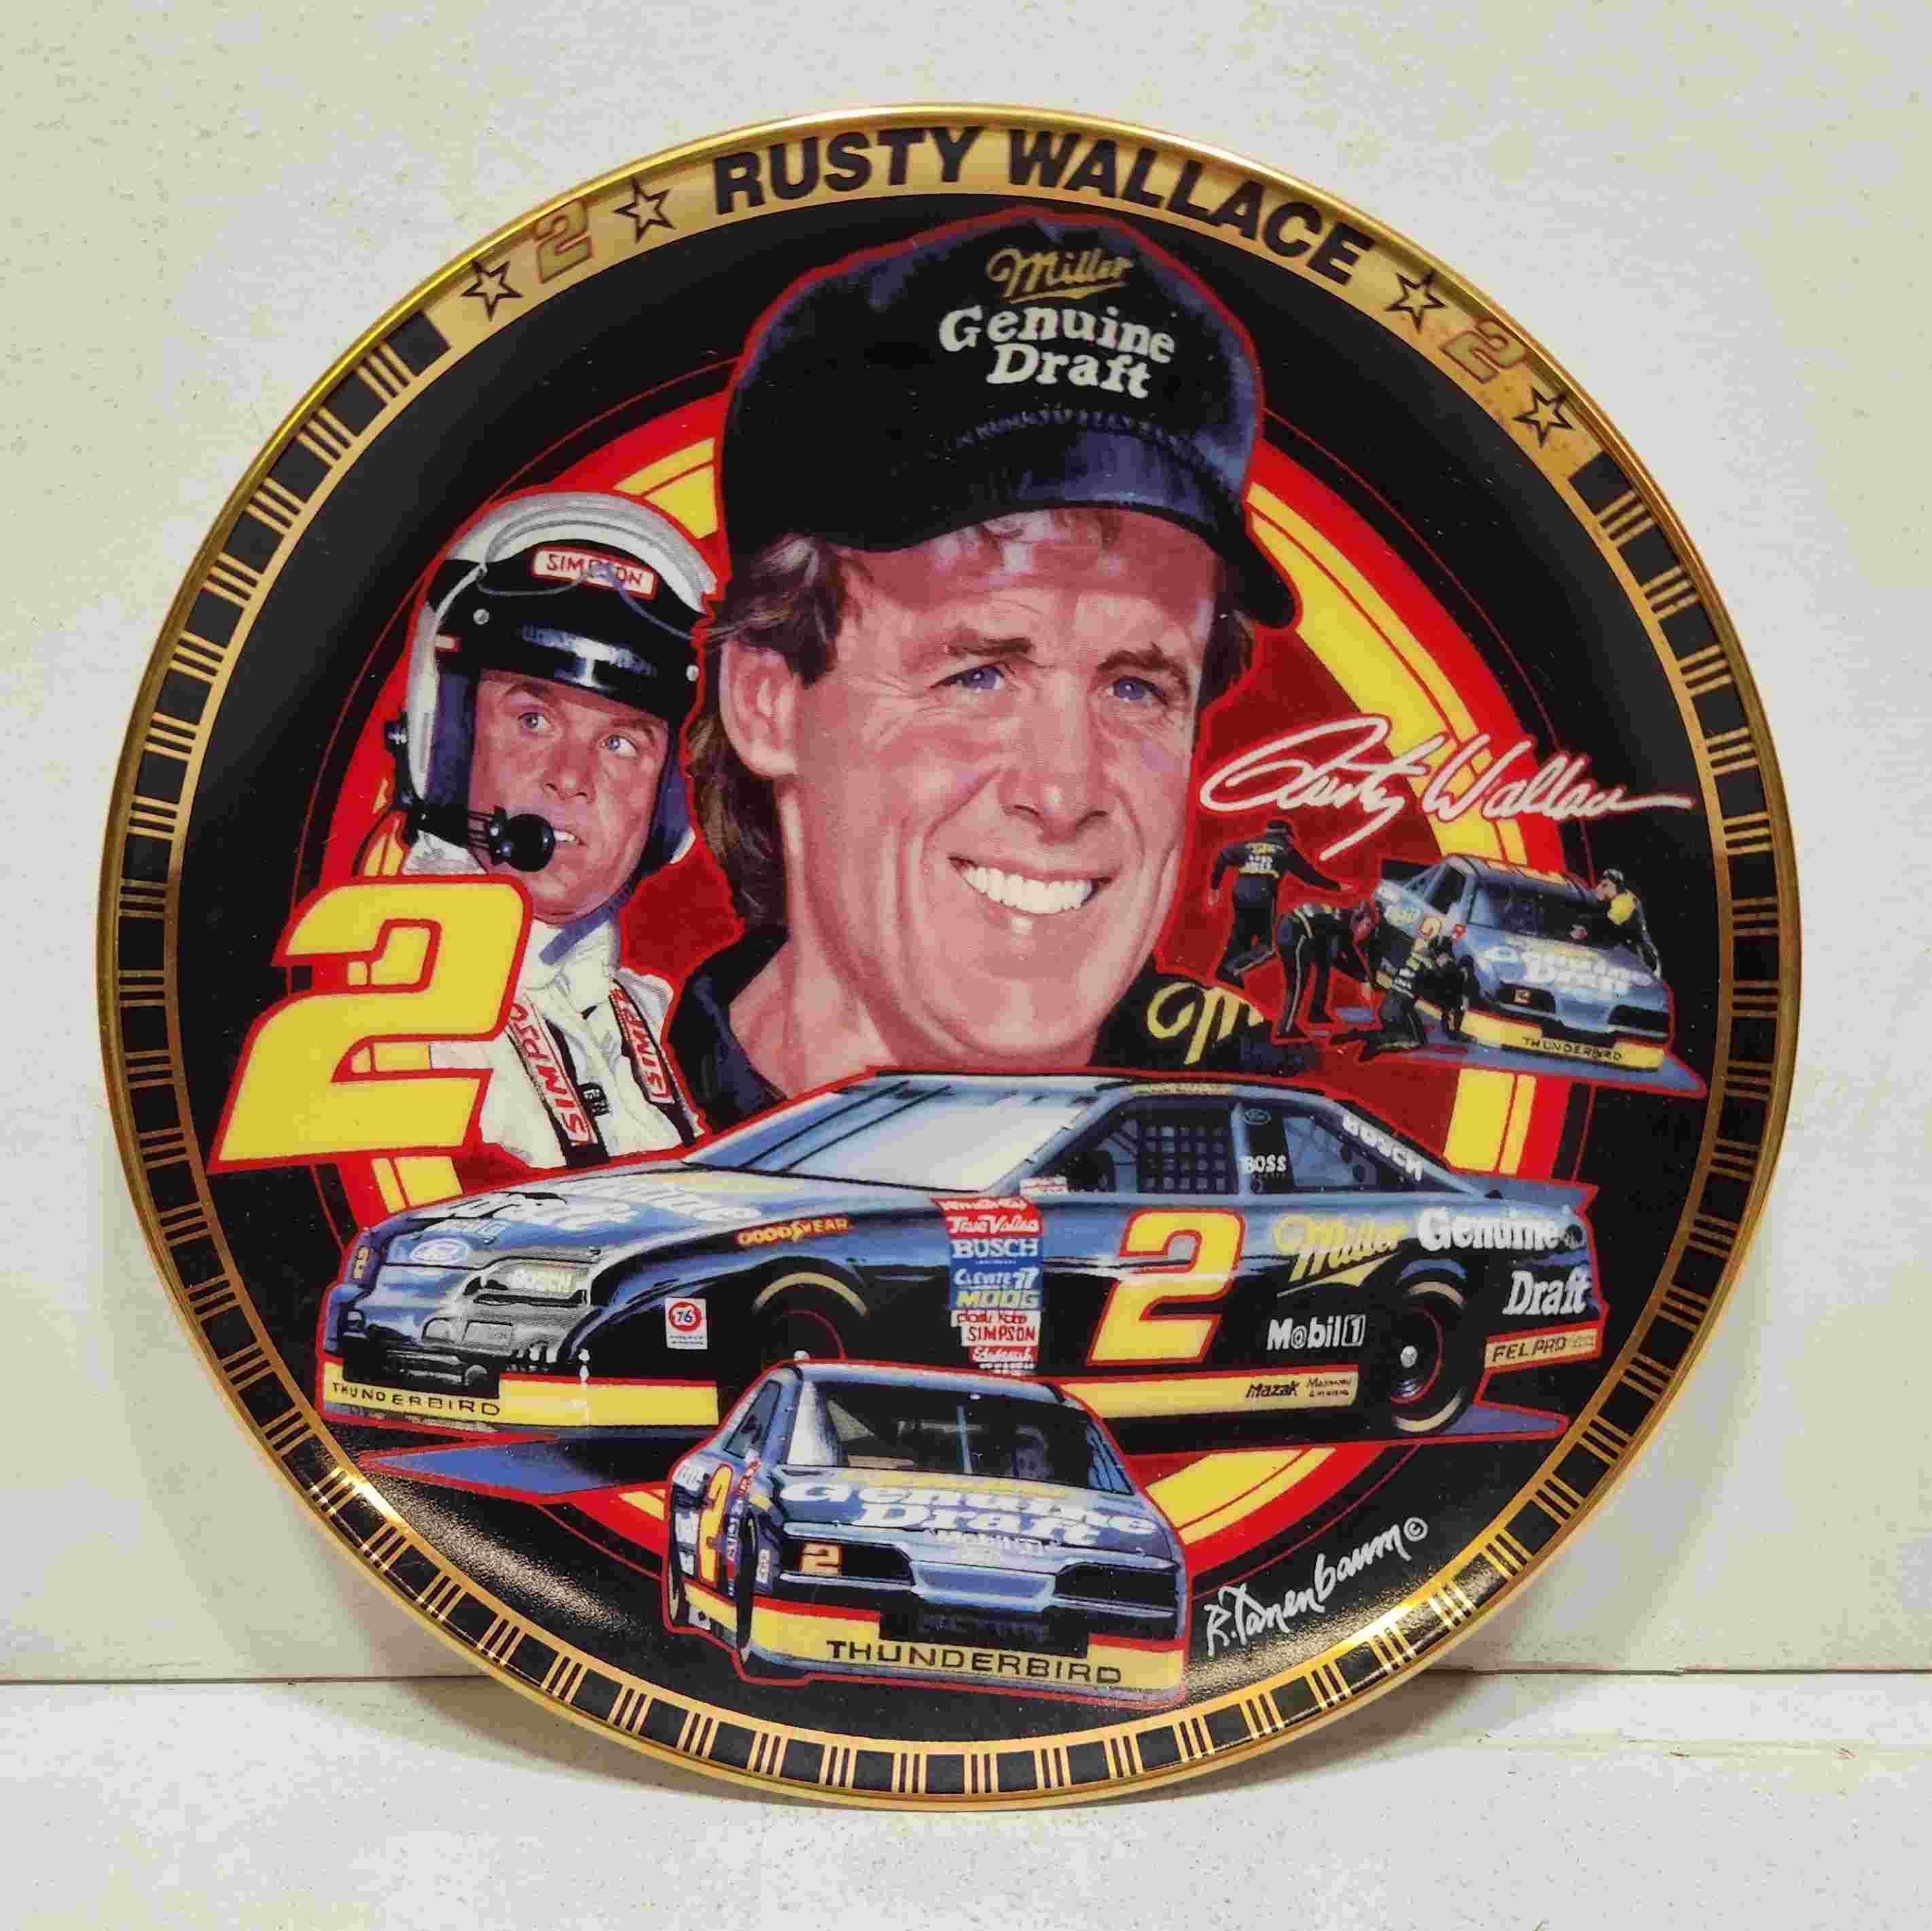 1994 Rusty Wallace Drivers of Victory Lane by The Hamilton Collection